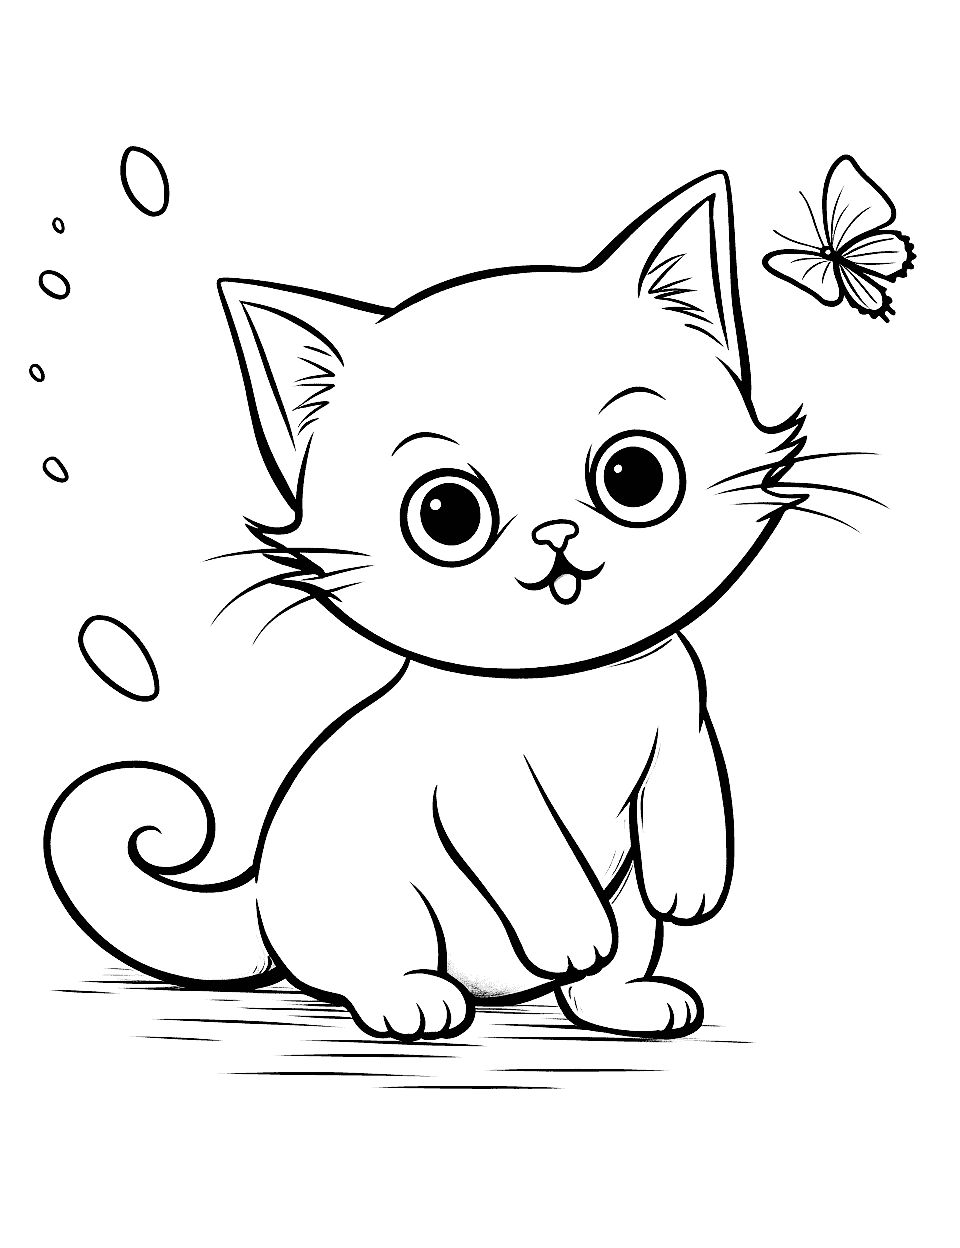 Chibi Cat Playing With a Butterfly Coloring Page - A Chibi-style cat playfully chasing a colorful butterfly.